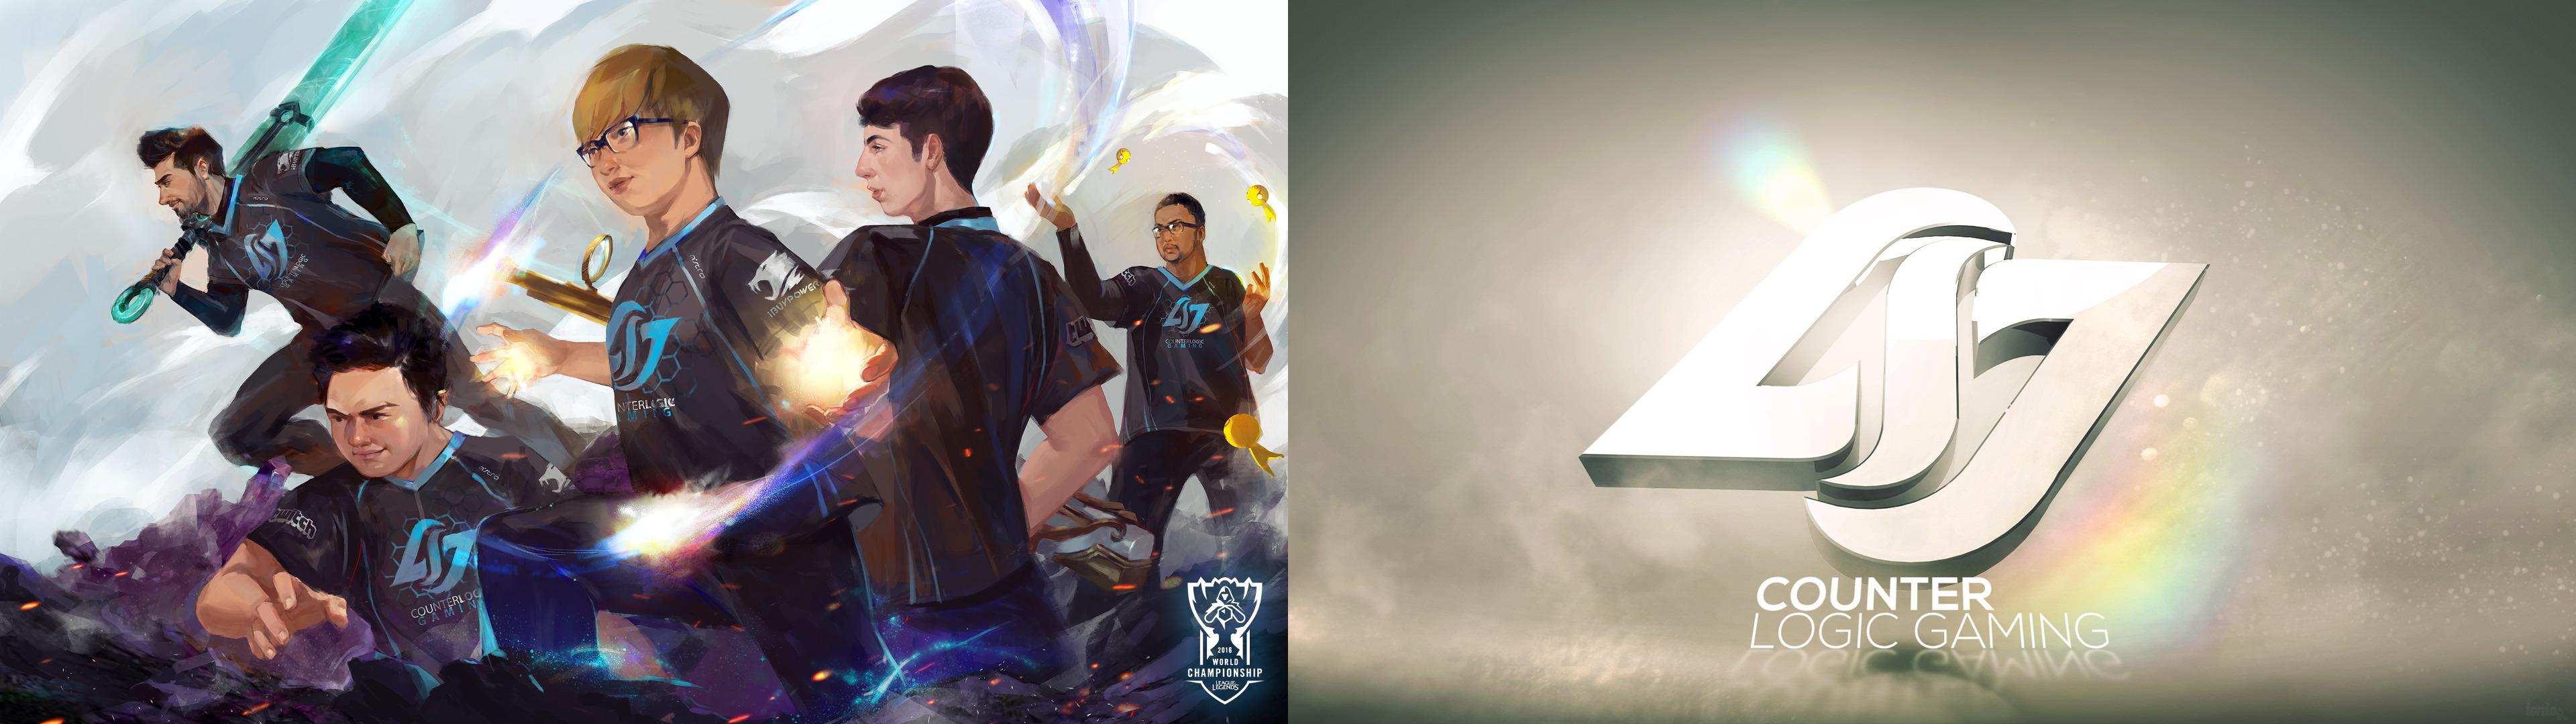 League of Legends, Clg, Counter Logic Gaming, World championship Wallpaper